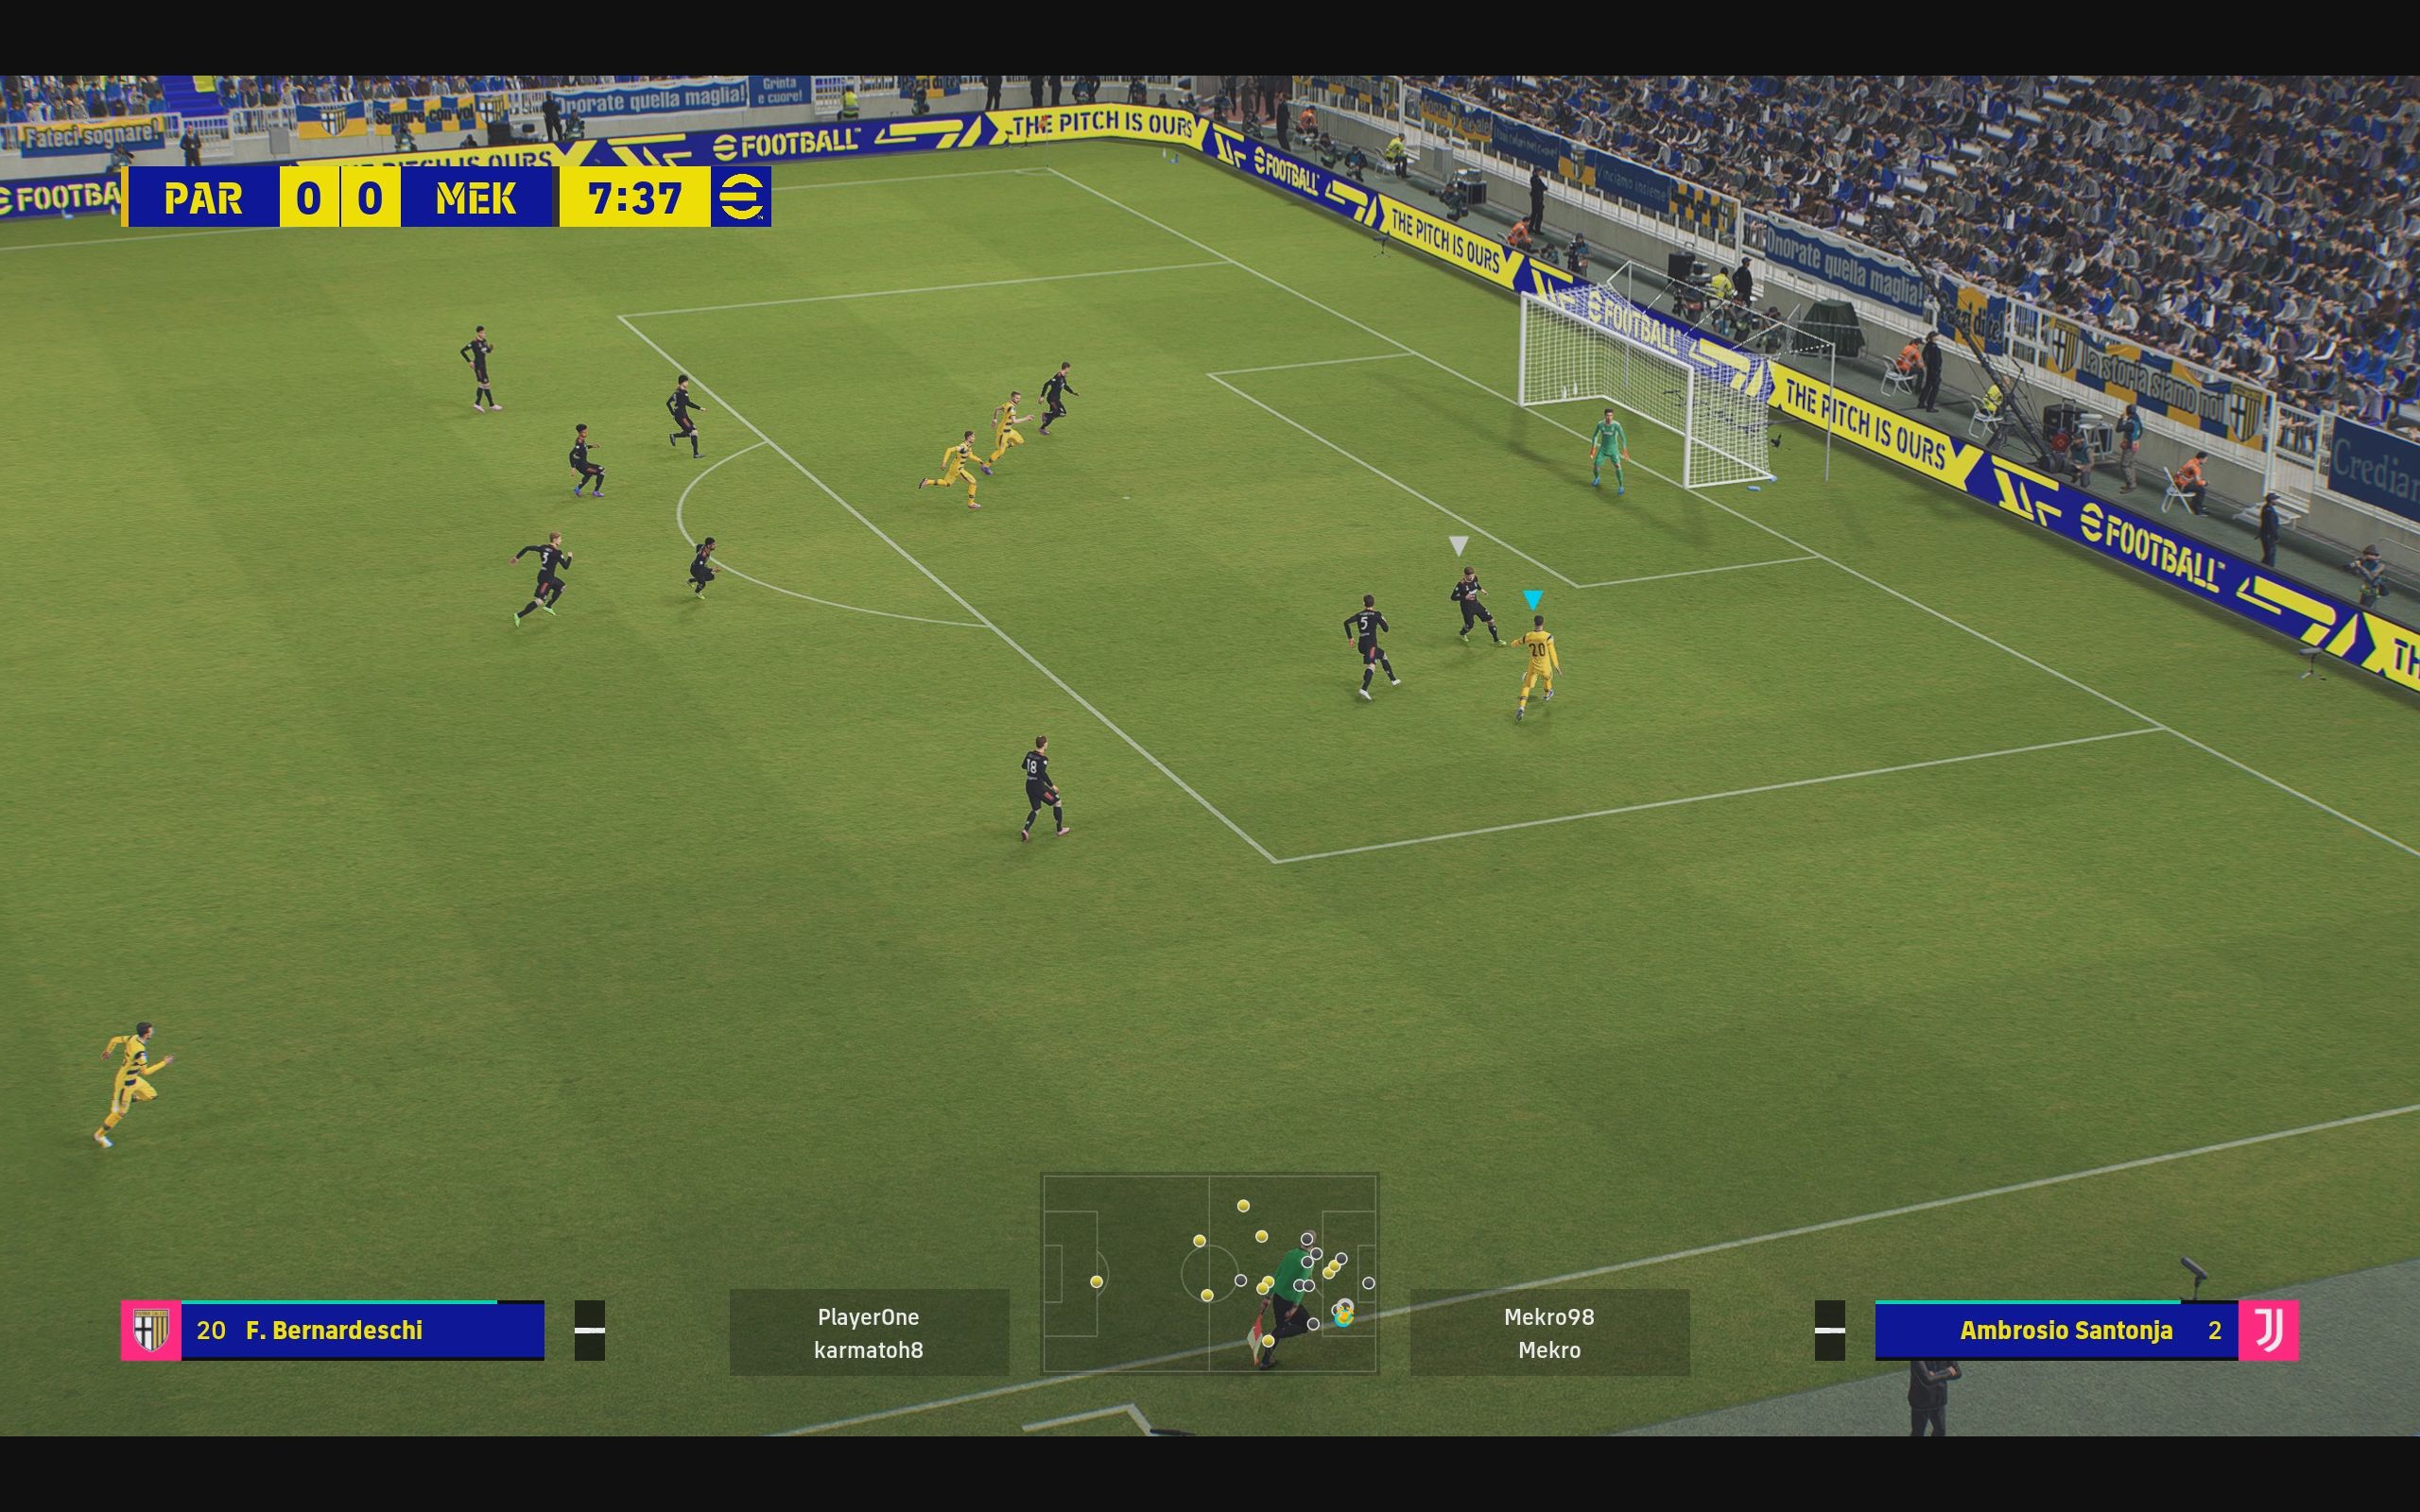 eFootball review: Match screenshot of a team in all yellow entering the opposing penalty box while attacking a team in all black.